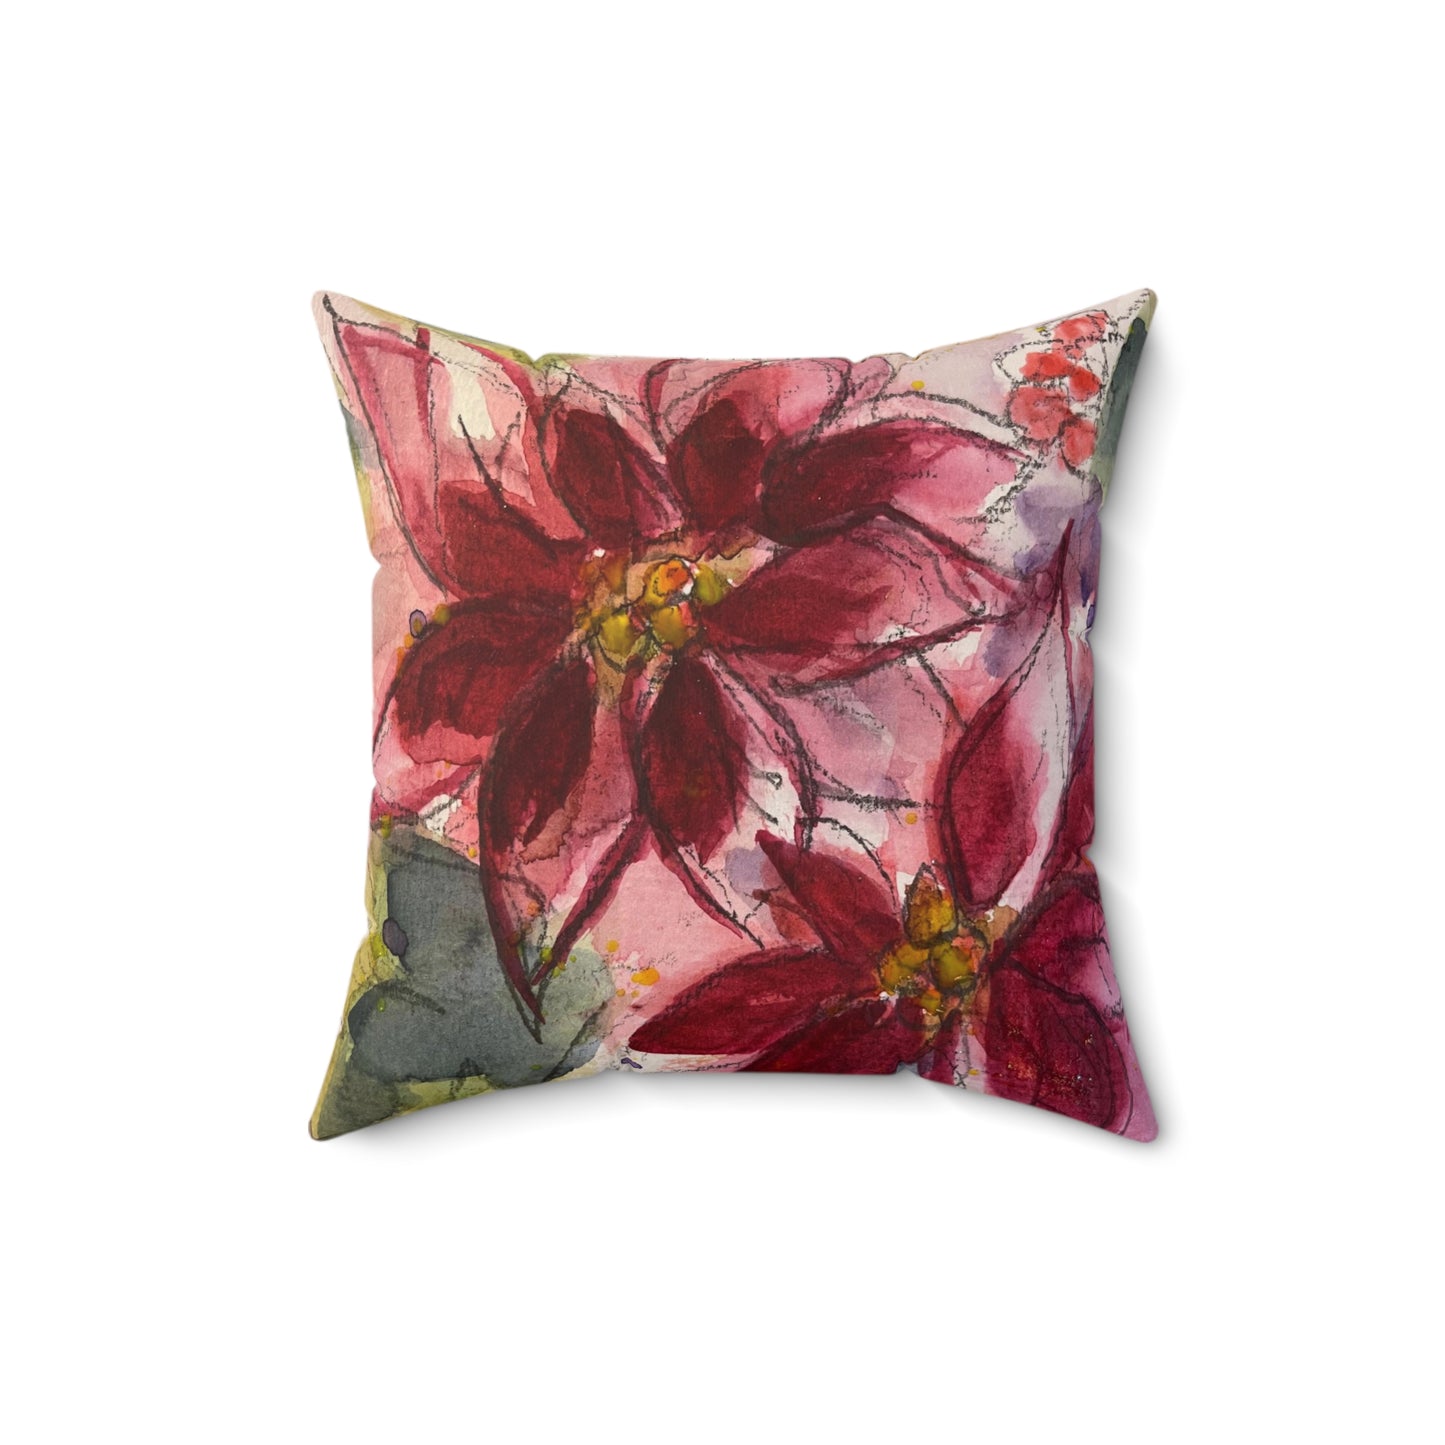 Red Poinsettias Indoor Spun Polyester Square Pillow